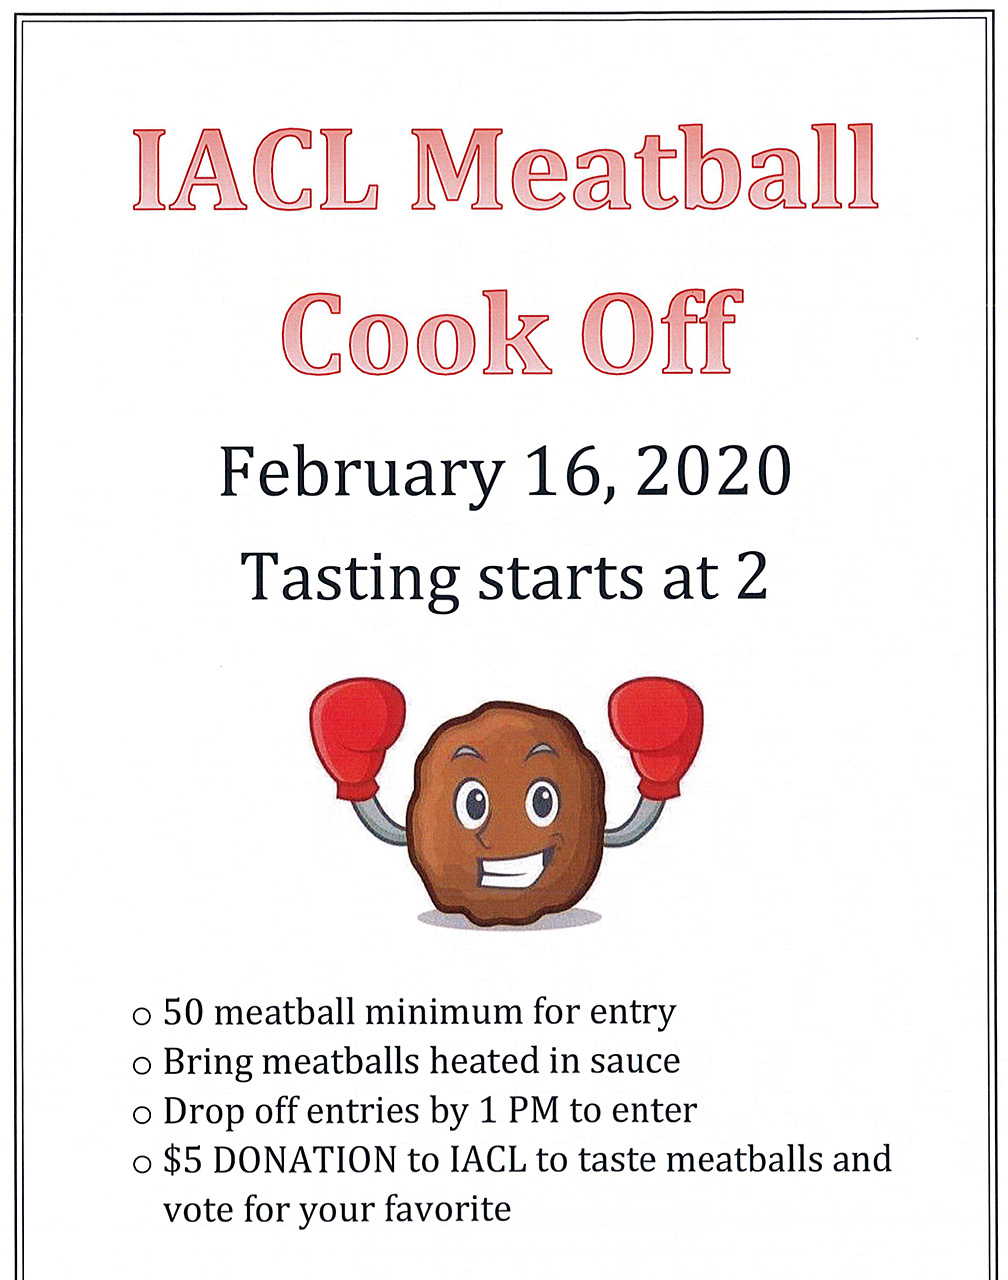 ICAL Meatball Cookoff